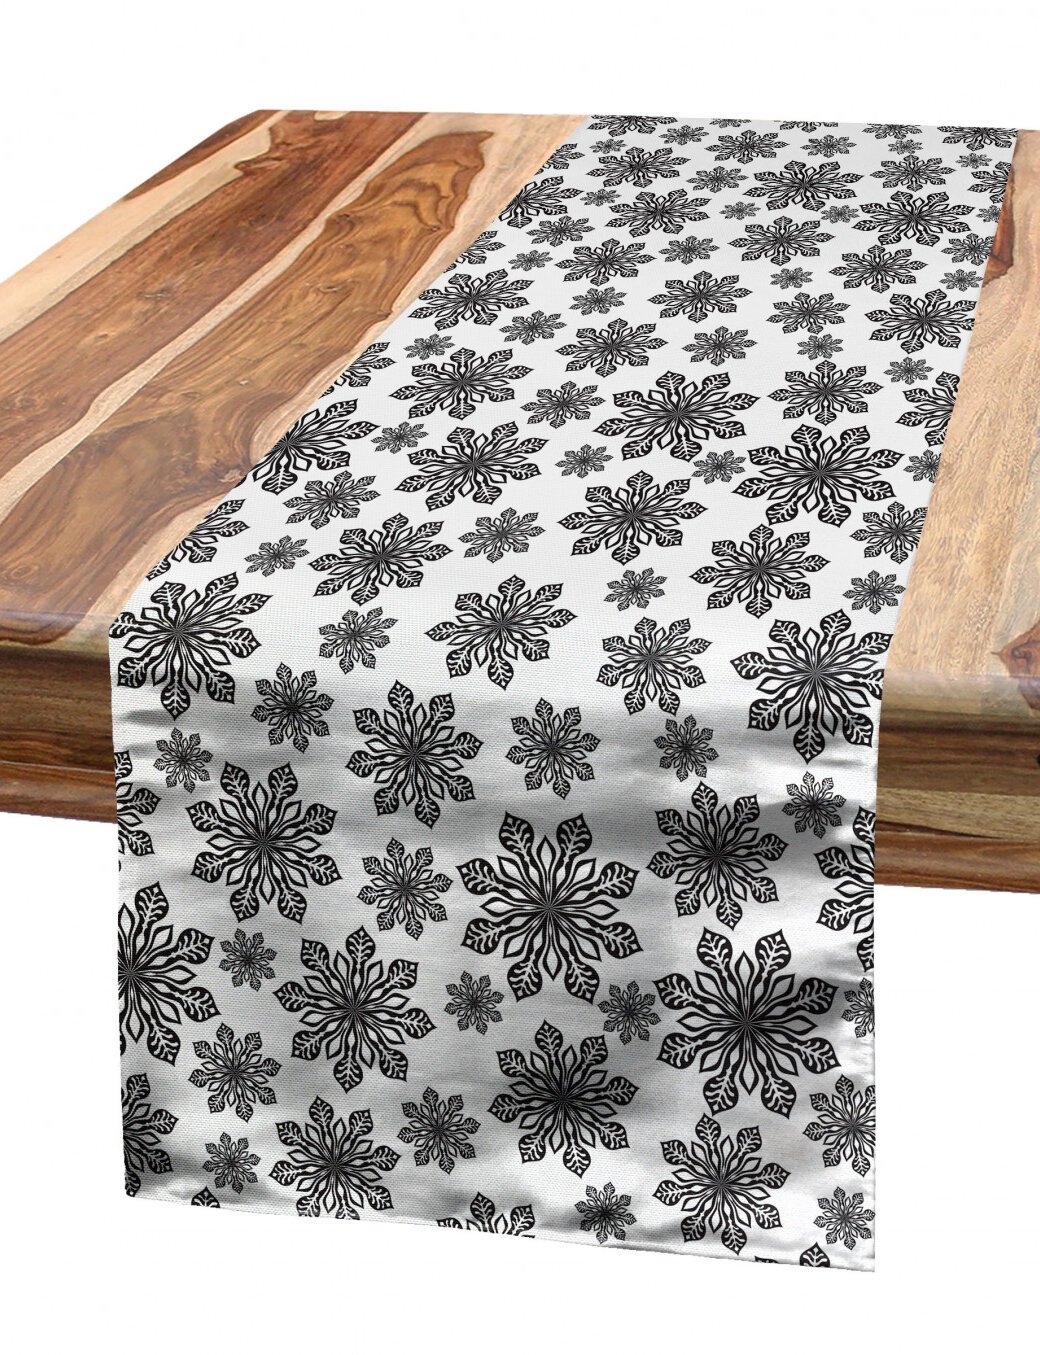 Monochrome Vertical Lace Strips Abstract Flowery Pattern and Dots Ornaments Dining Room Kitchen Rectangular Runner Dark Blue and White 16 X 90 Ambesonne Floral Table Runner